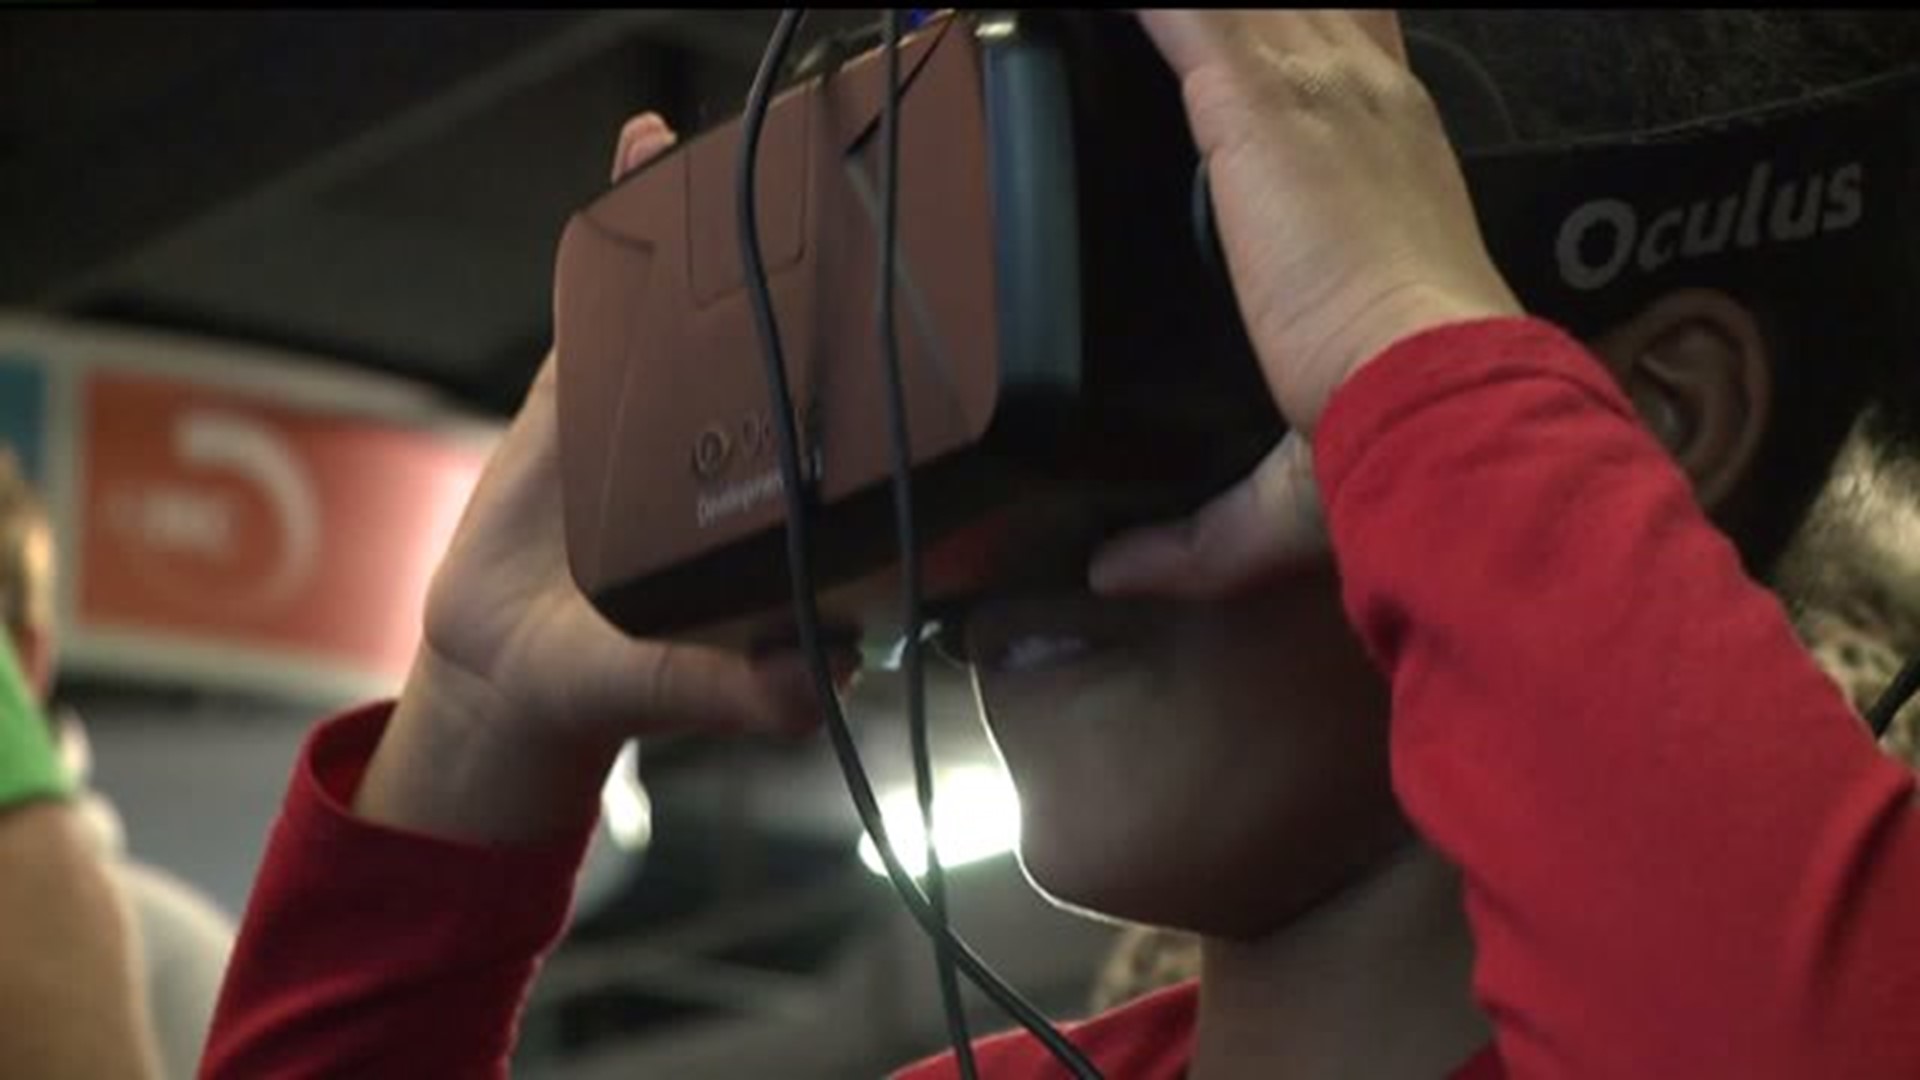 New jobs with virtual reality